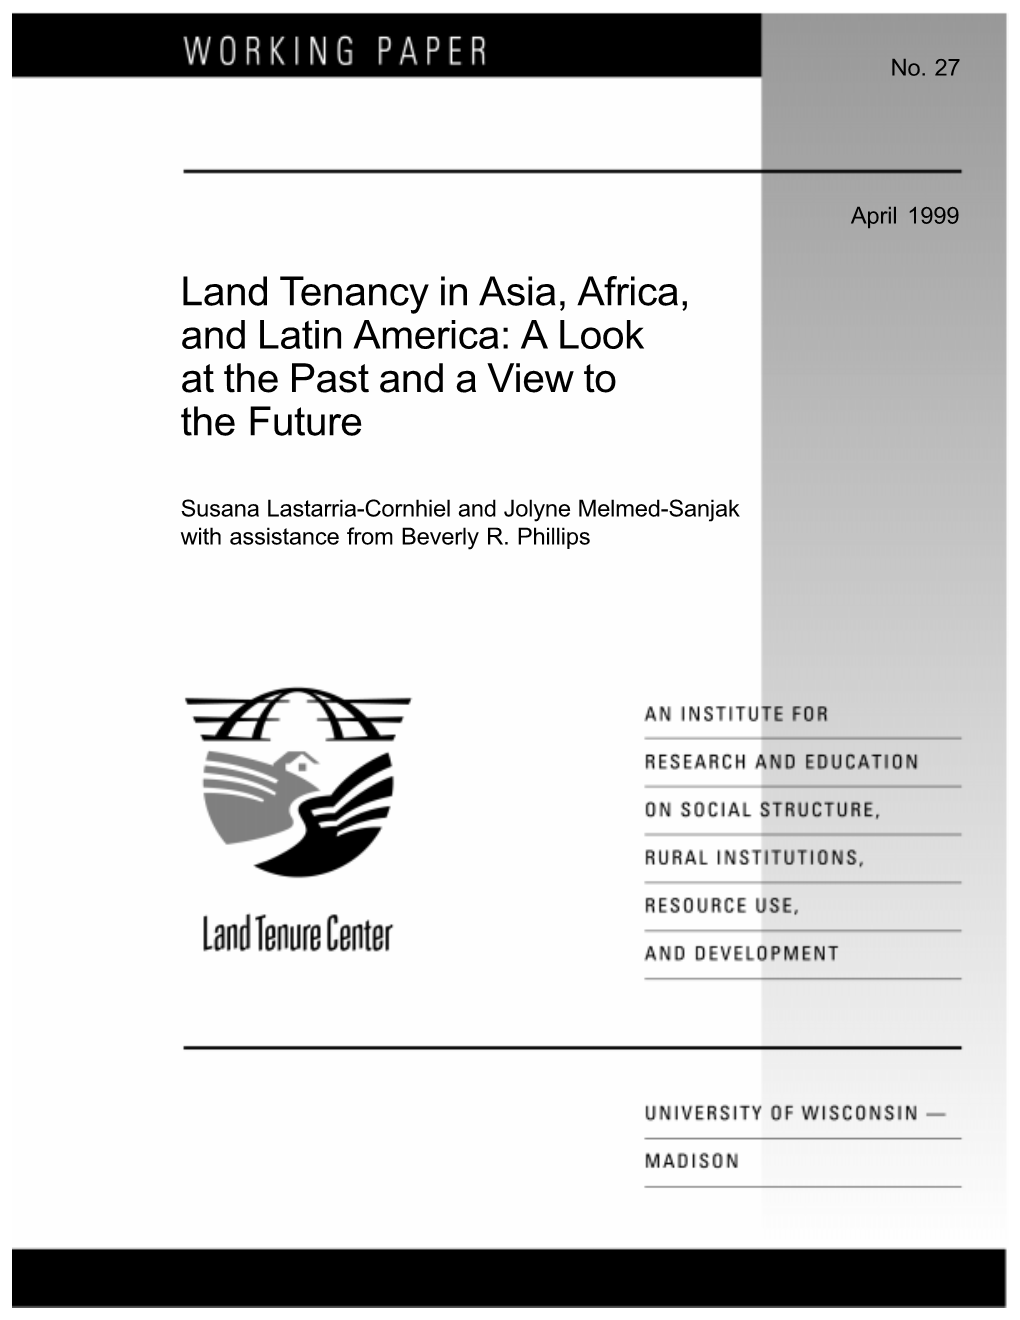 Land Tenancy in Asia, Africa, and Latin America: a Look at the Past and a View to the Future